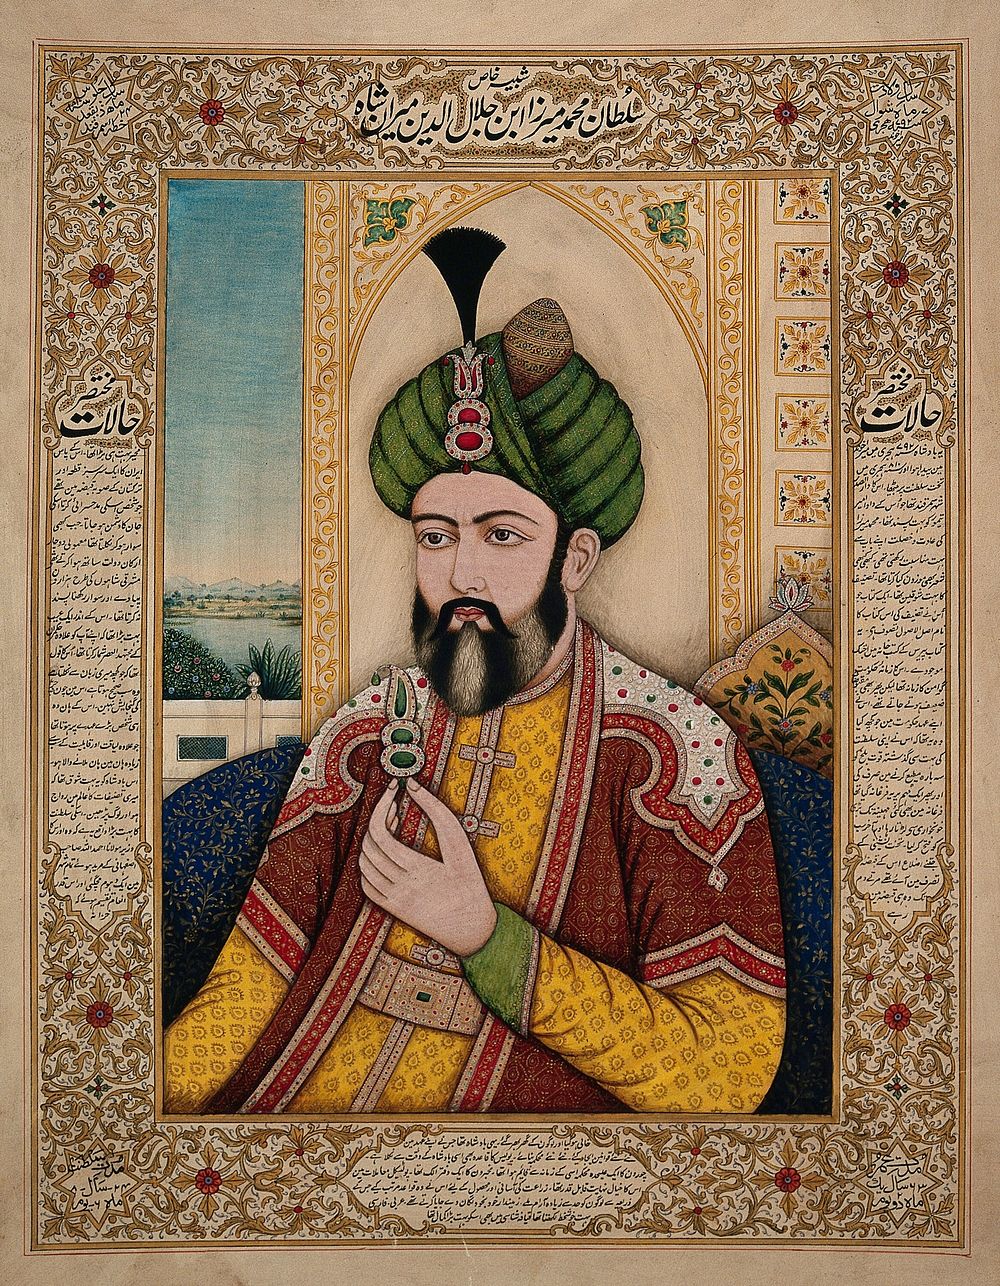 A Mughal Emperor or member of a royal family holding a turban ornament. Gouache painting by an Indian painter.